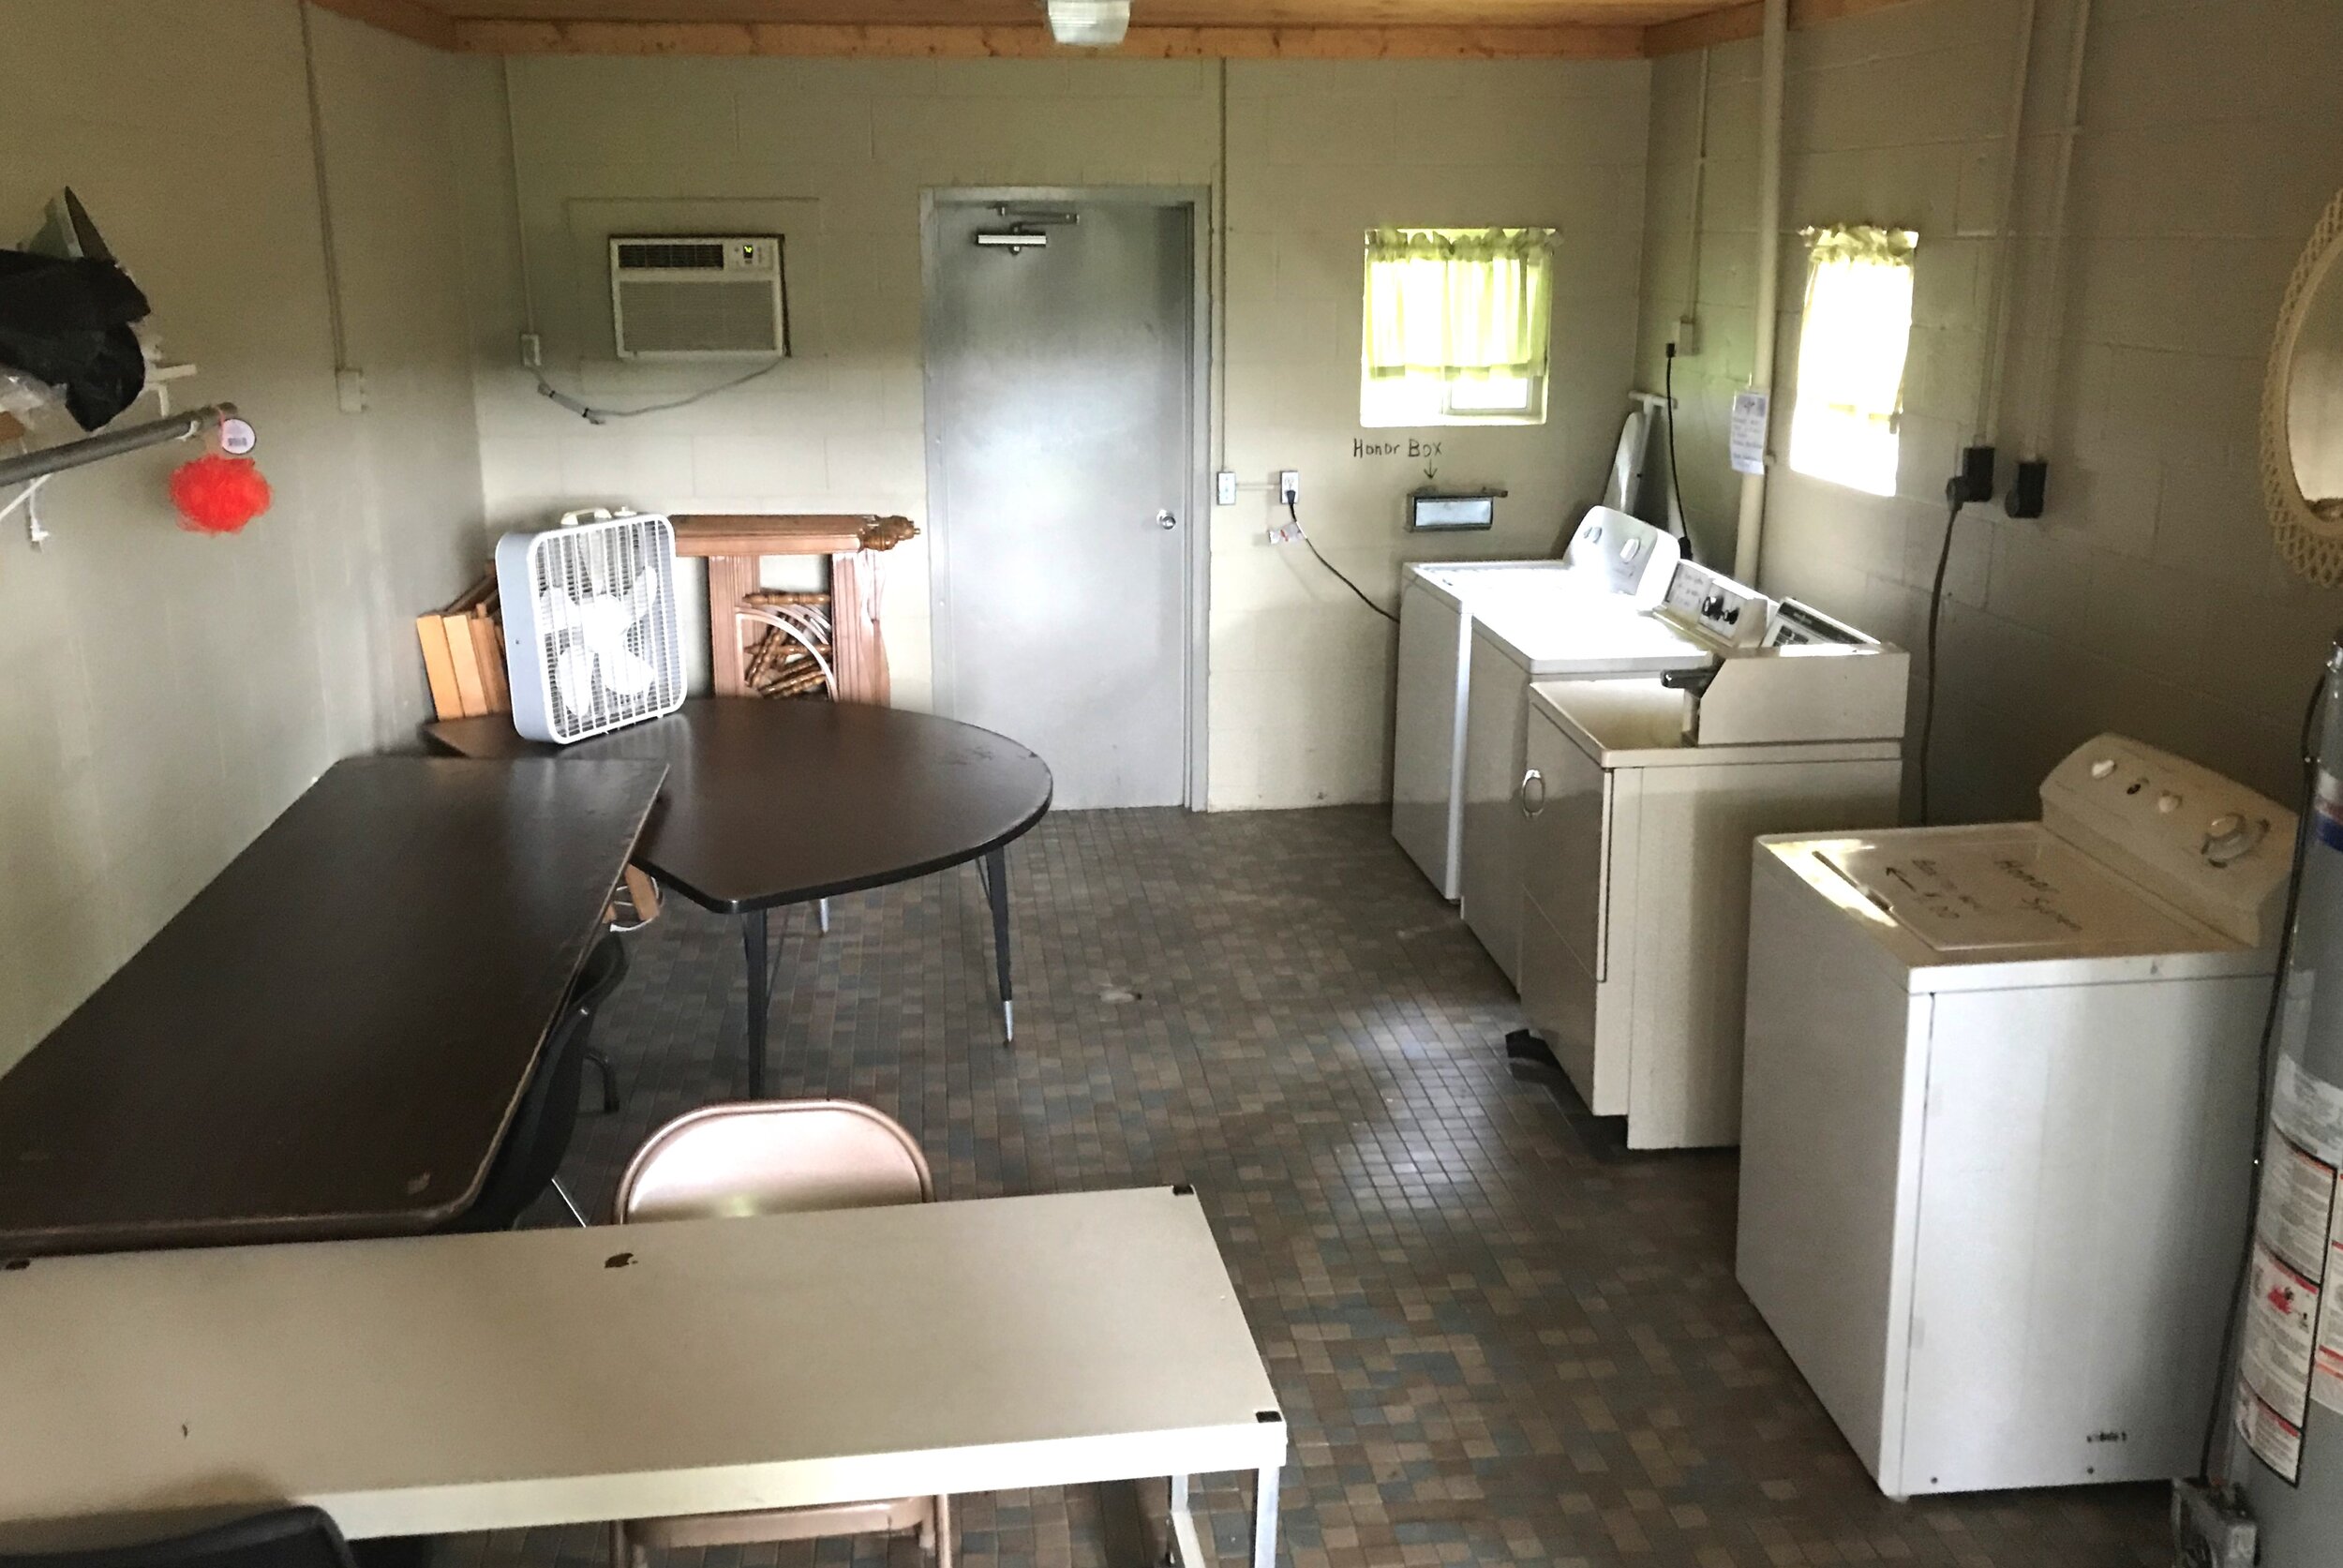  The Warsaw Retreat Center offers a full washer and dryer set up for families/individuals who may need this convenience  